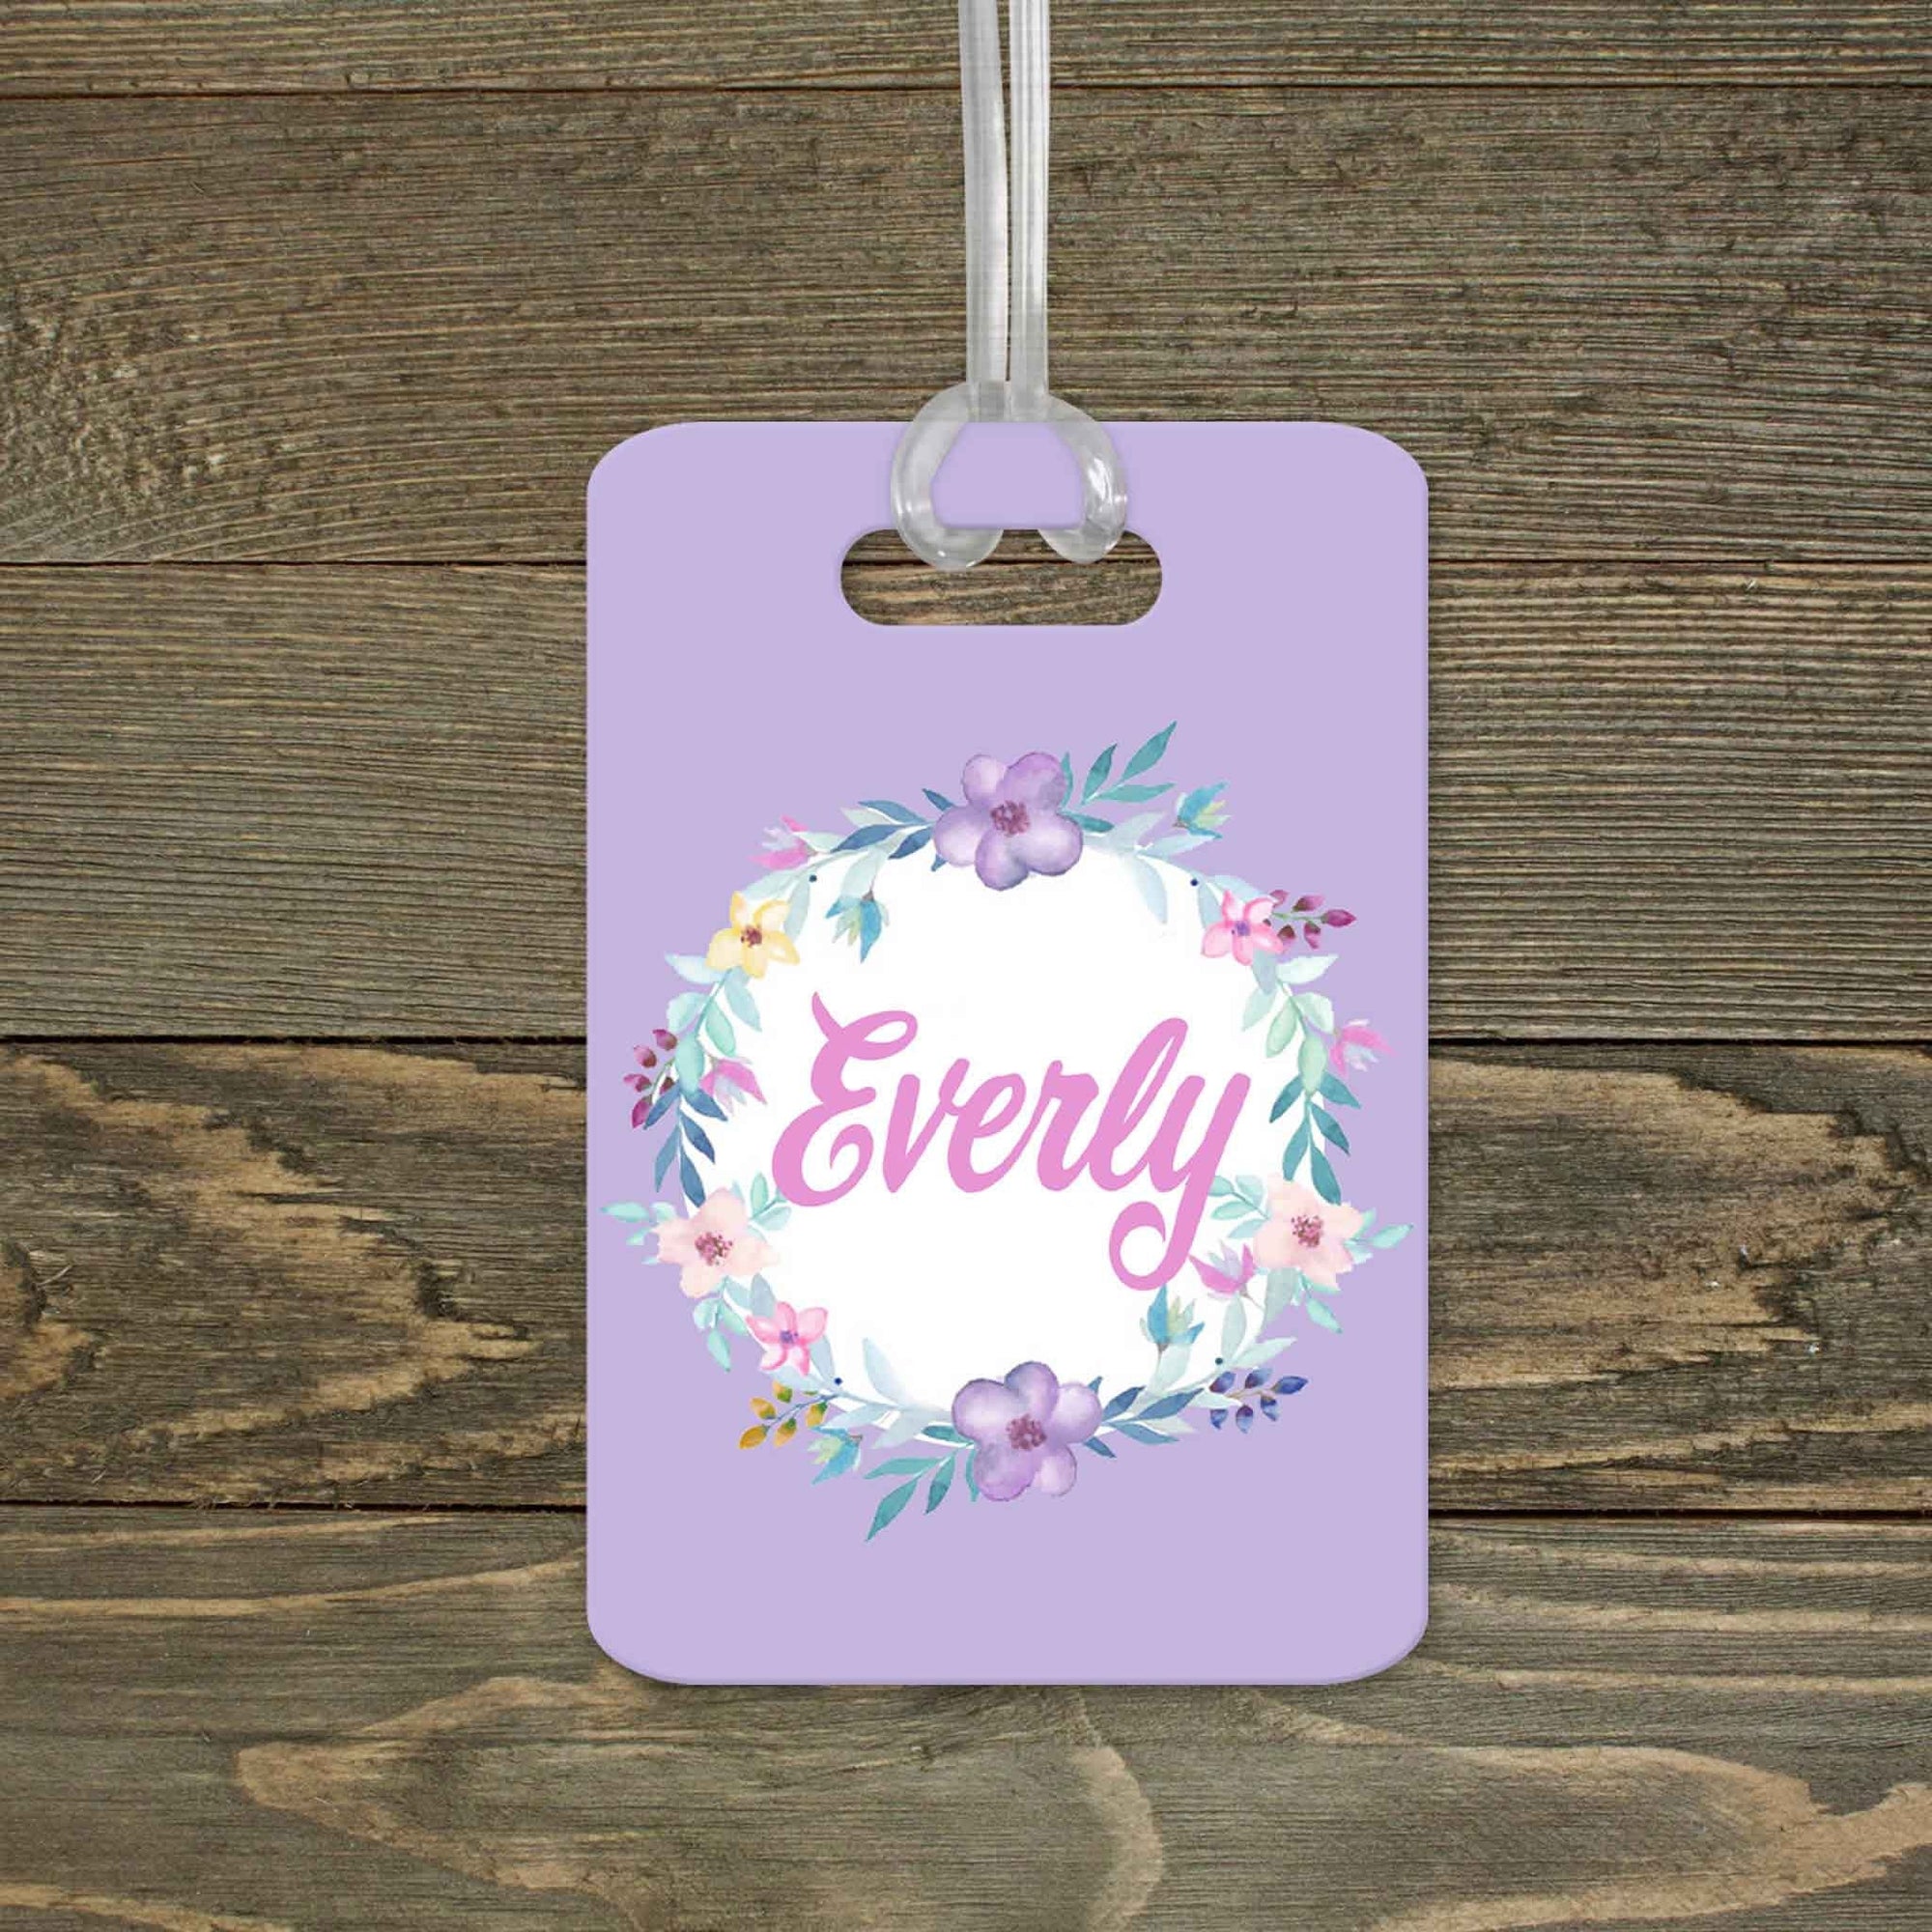 This & That Solutions - Personalized Luggage Tag | Custom Monogram Bag Tag | Lavender Wreath - Personalized Gifts & Custom Home Decor